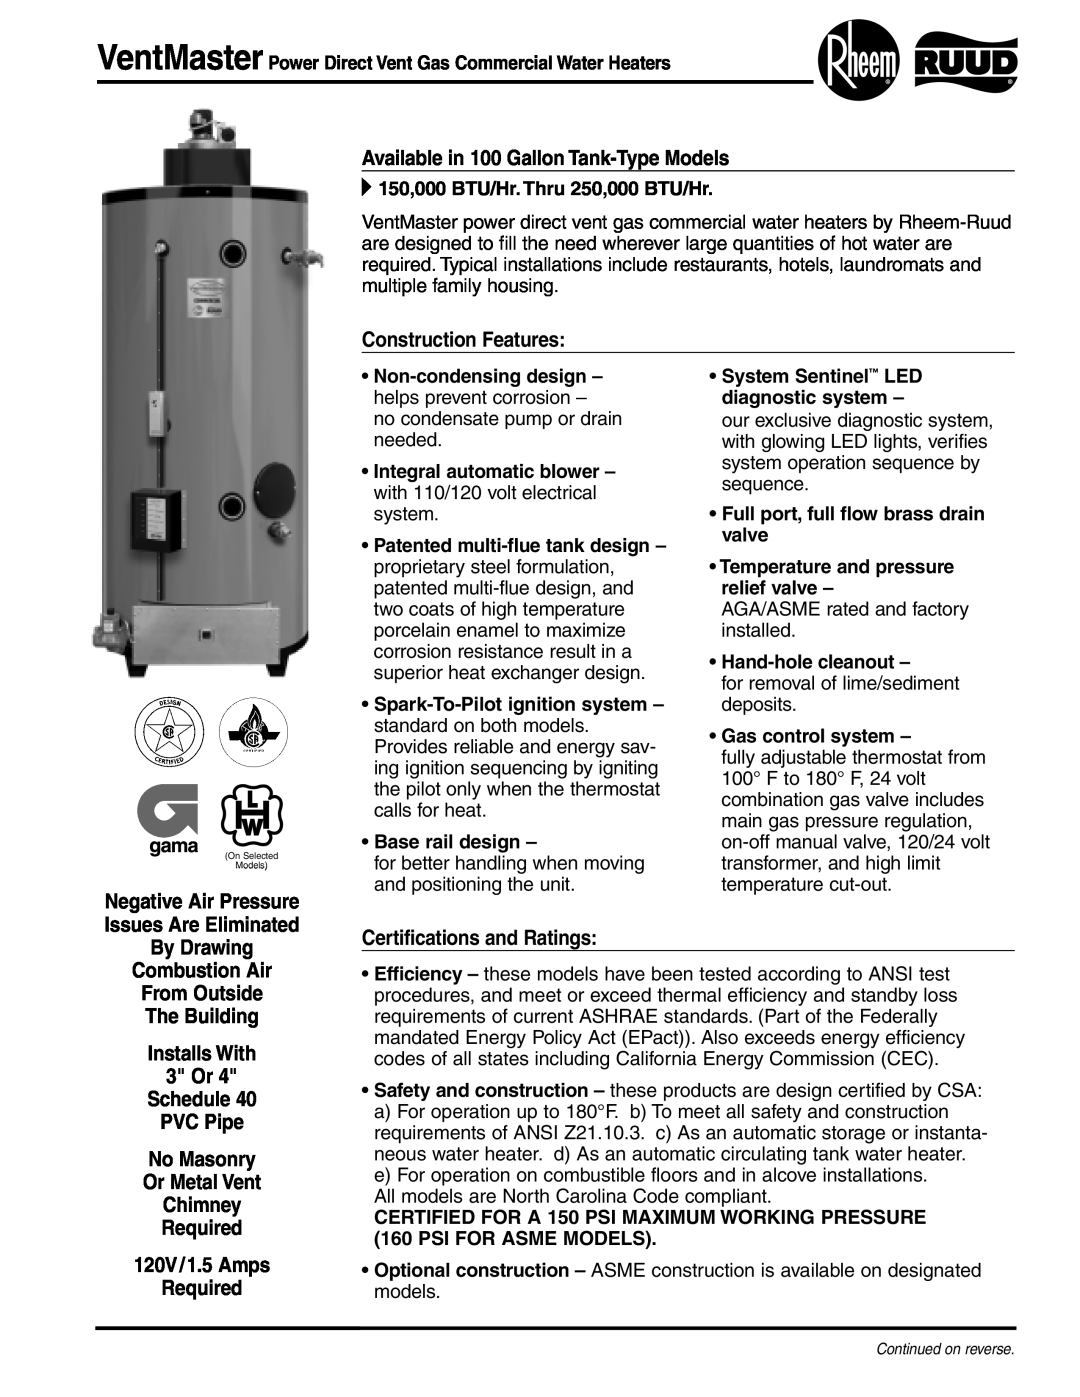 Rheem Direct Vent Gas Commercial Water Heater manual Available in 100 Gallon Tank-Type Models, Construction Features 